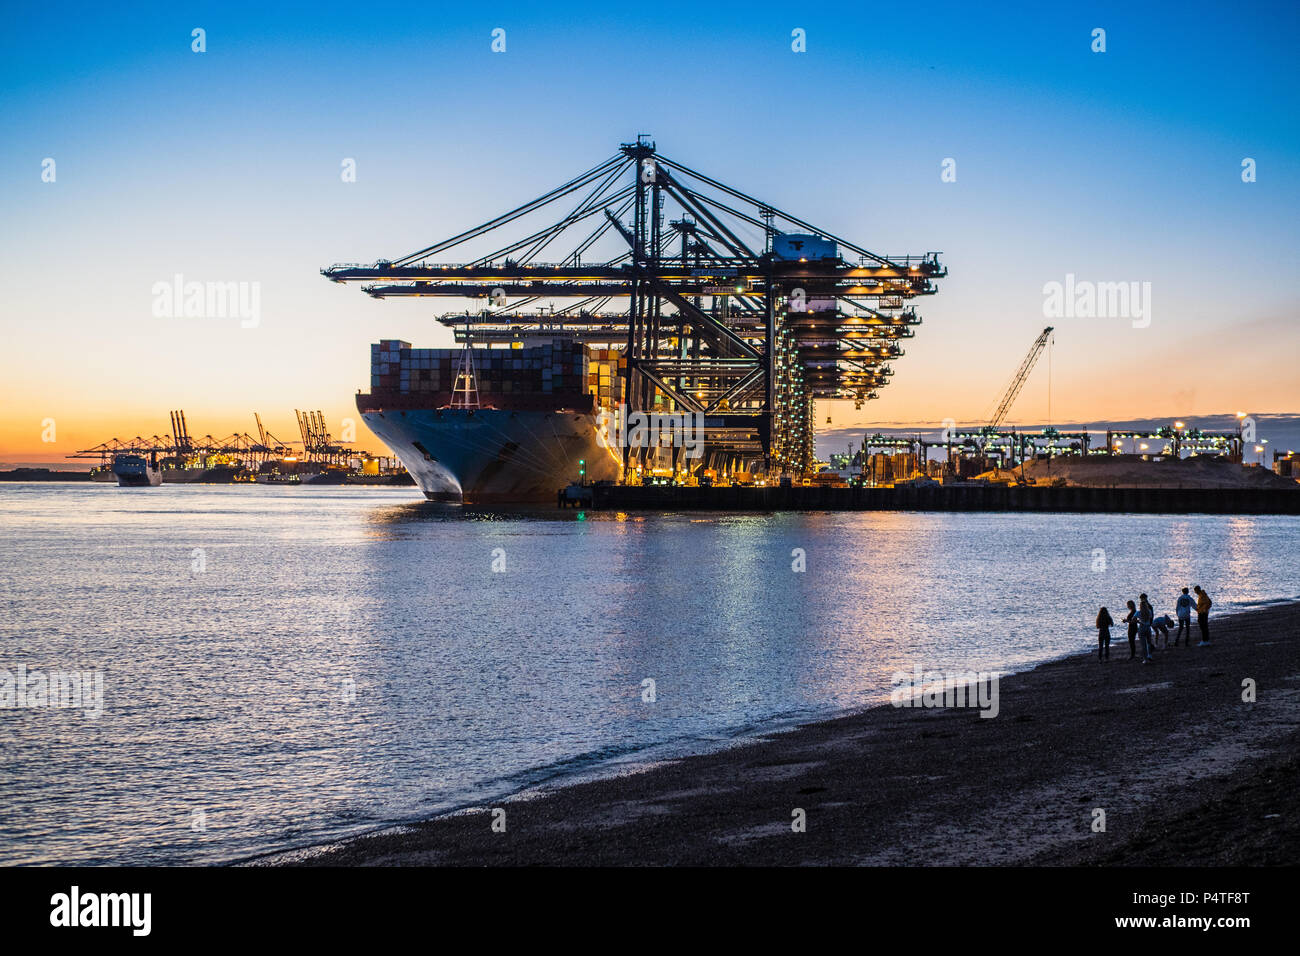 Port of Felixstowe - young people view ships loading and unloading containers at dusk in Felixstowe Port, the UK's largest container port. Stock Photo